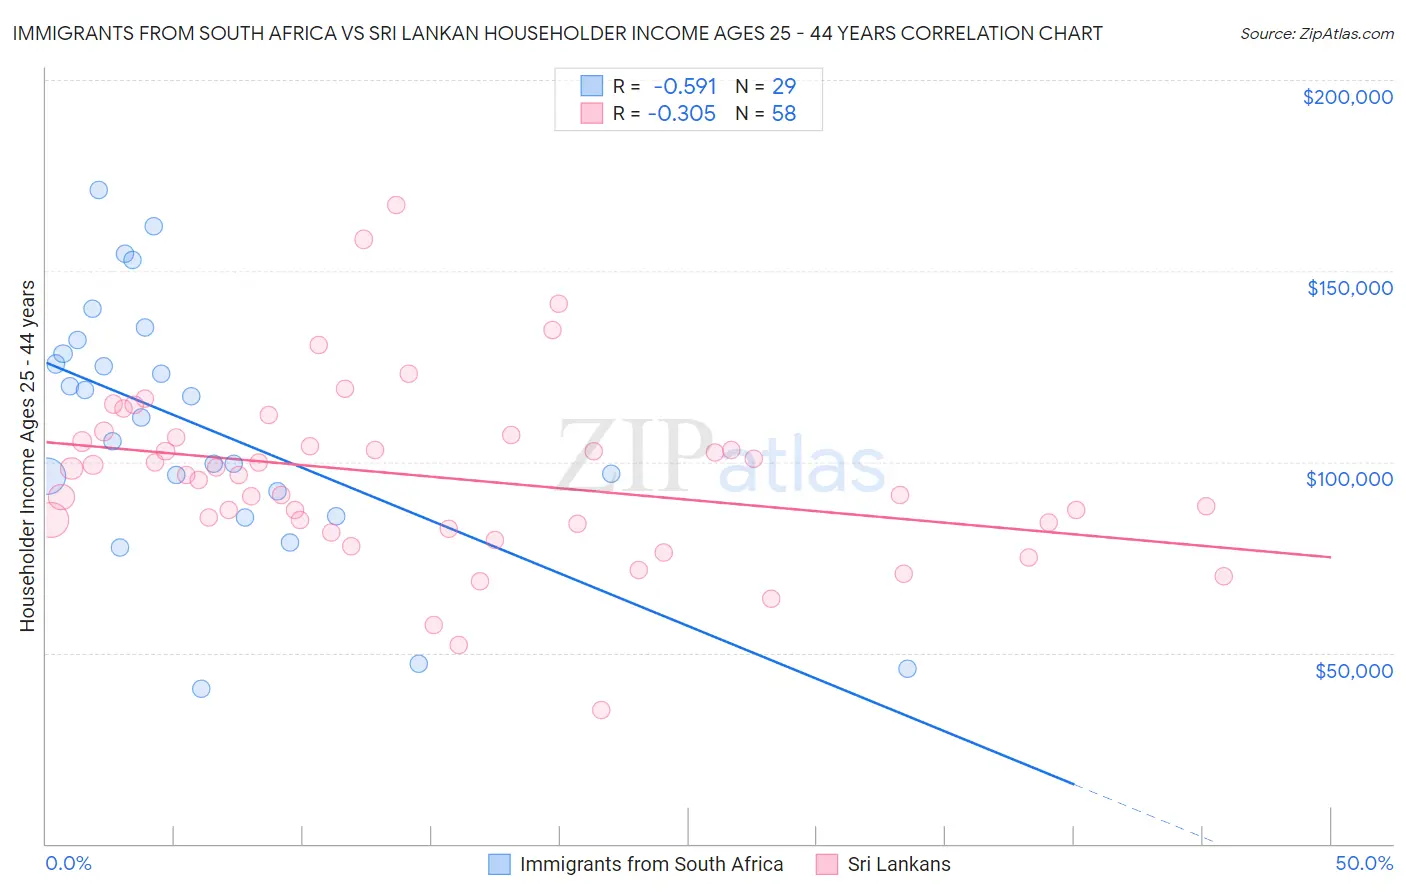 Immigrants from South Africa vs Sri Lankan Householder Income Ages 25 - 44 years